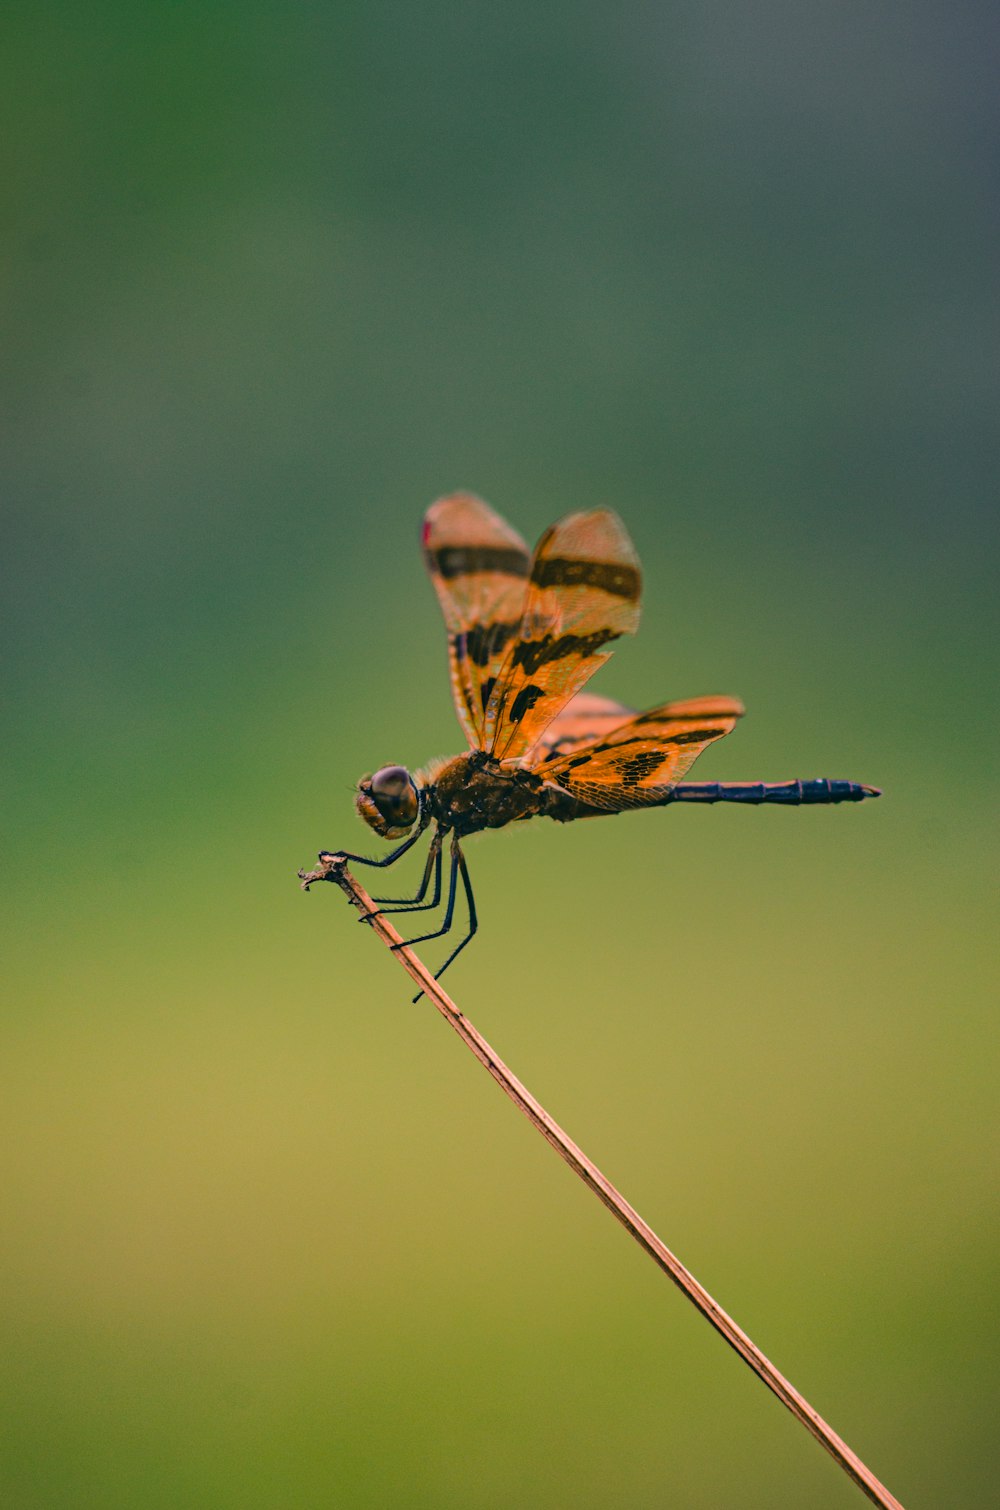 500+ Dragonfly Pictures | Download Free Images on Unsplash